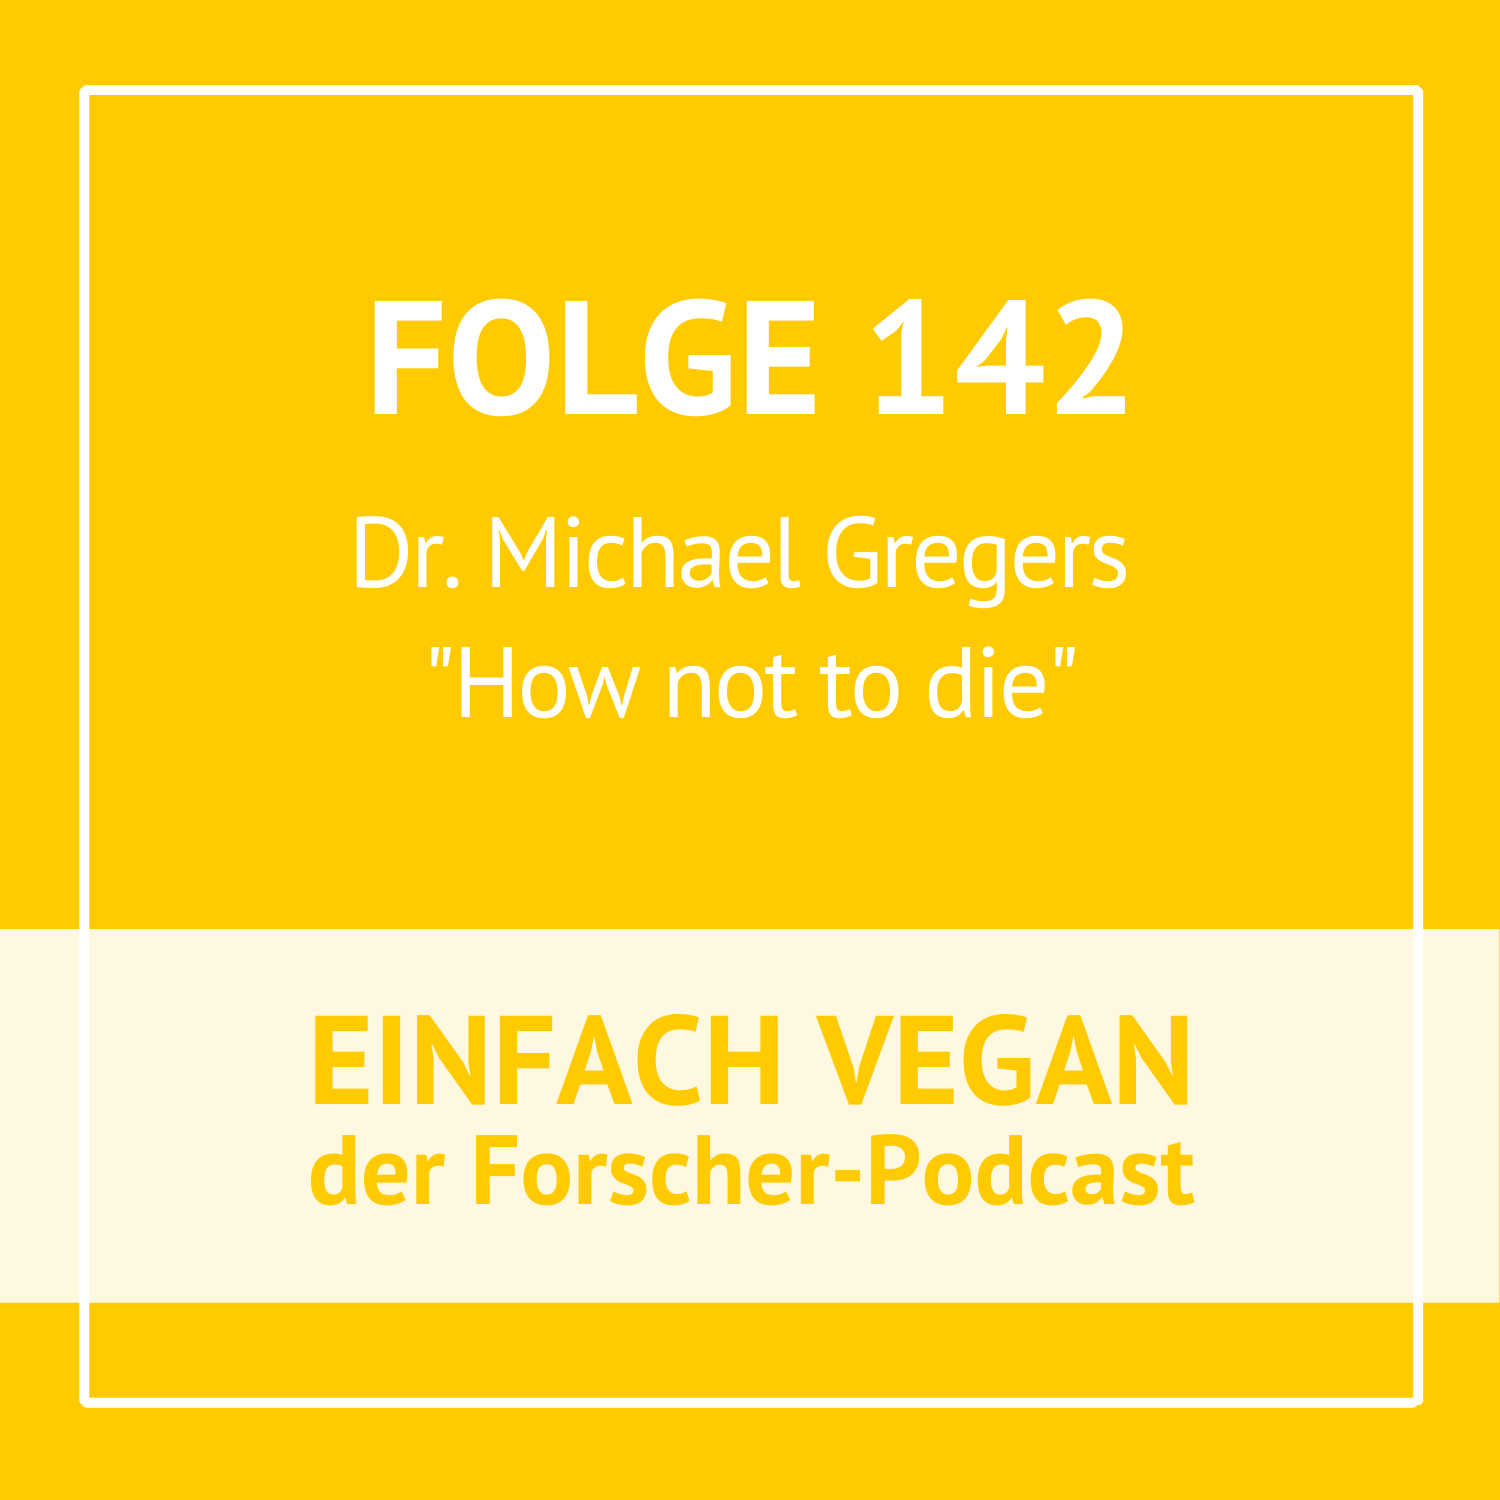 Folge 142 - Dr. Michael Gregers "How not to die"